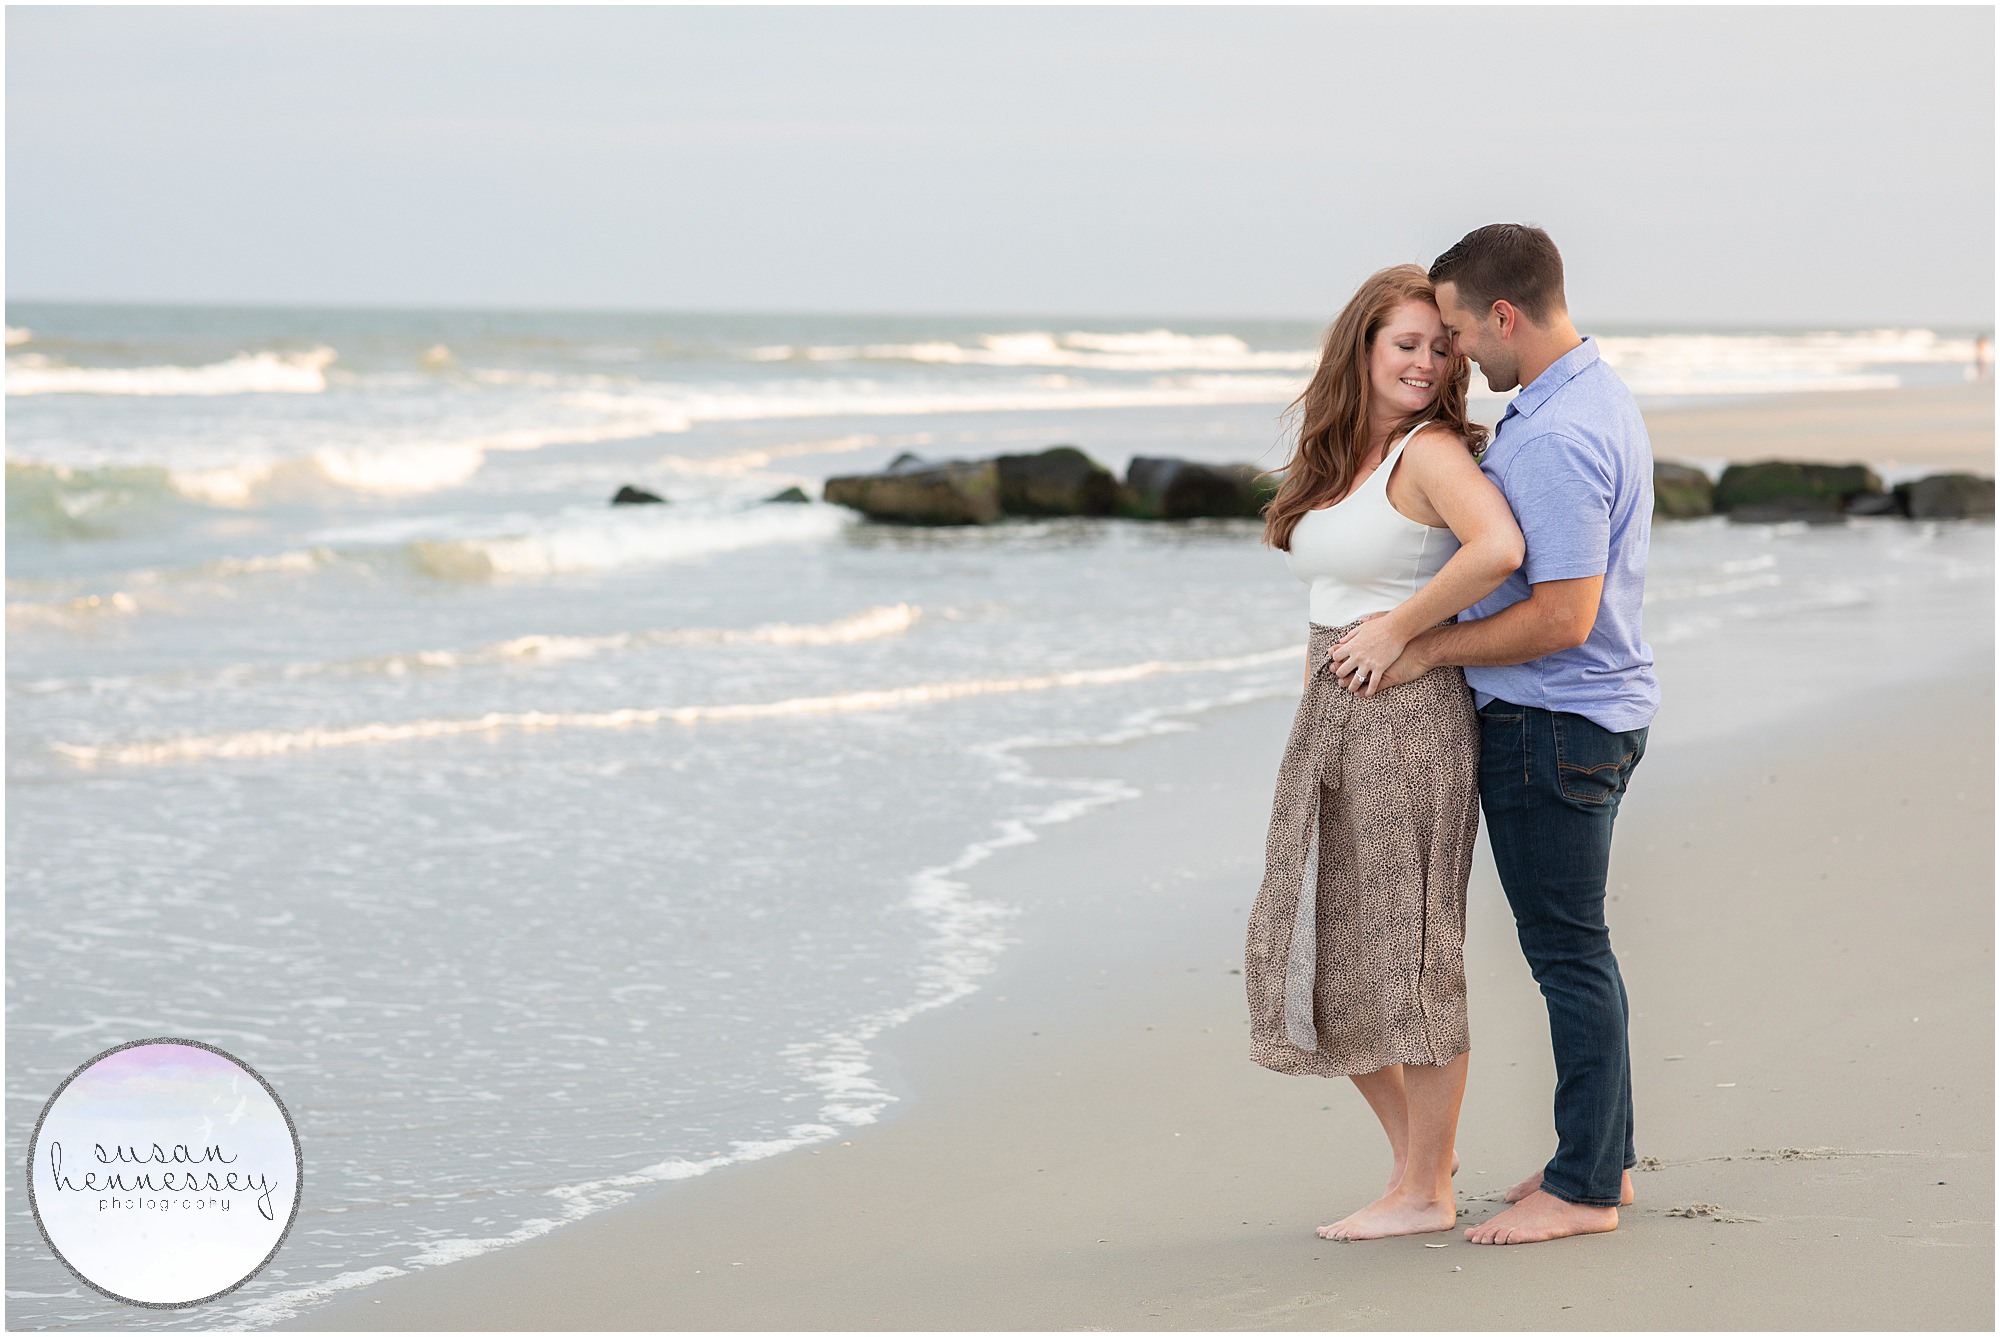 Engagement session after the proposal in Stone Harbor, NJ